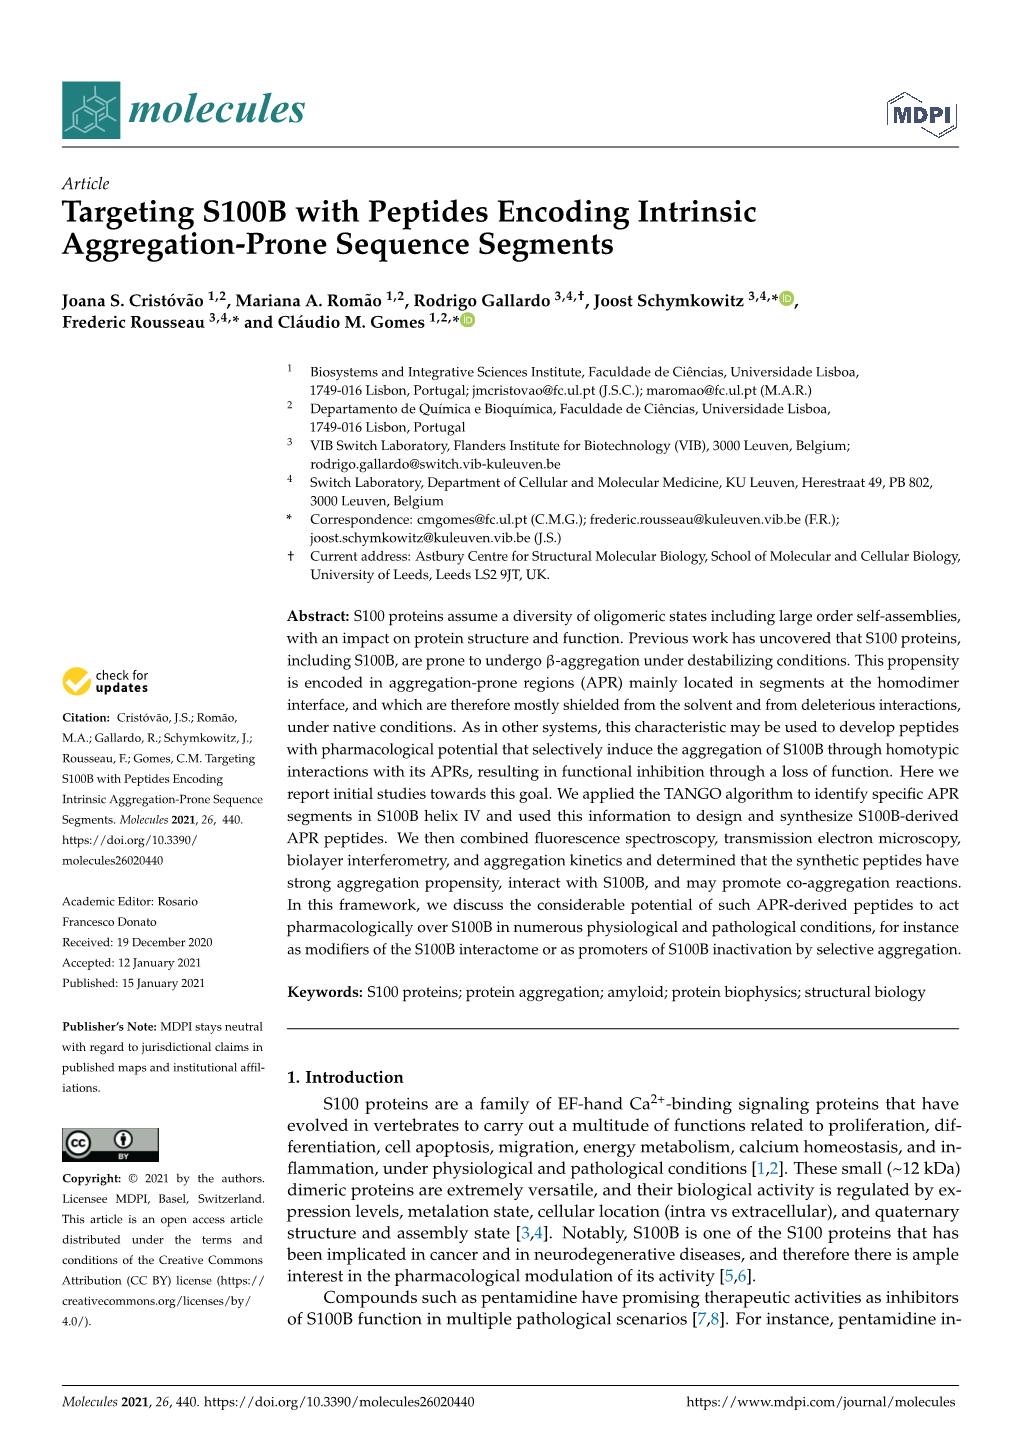 Targeting S100B with Peptides Encoding Intrinsic Aggregation-Prone Sequence Segments